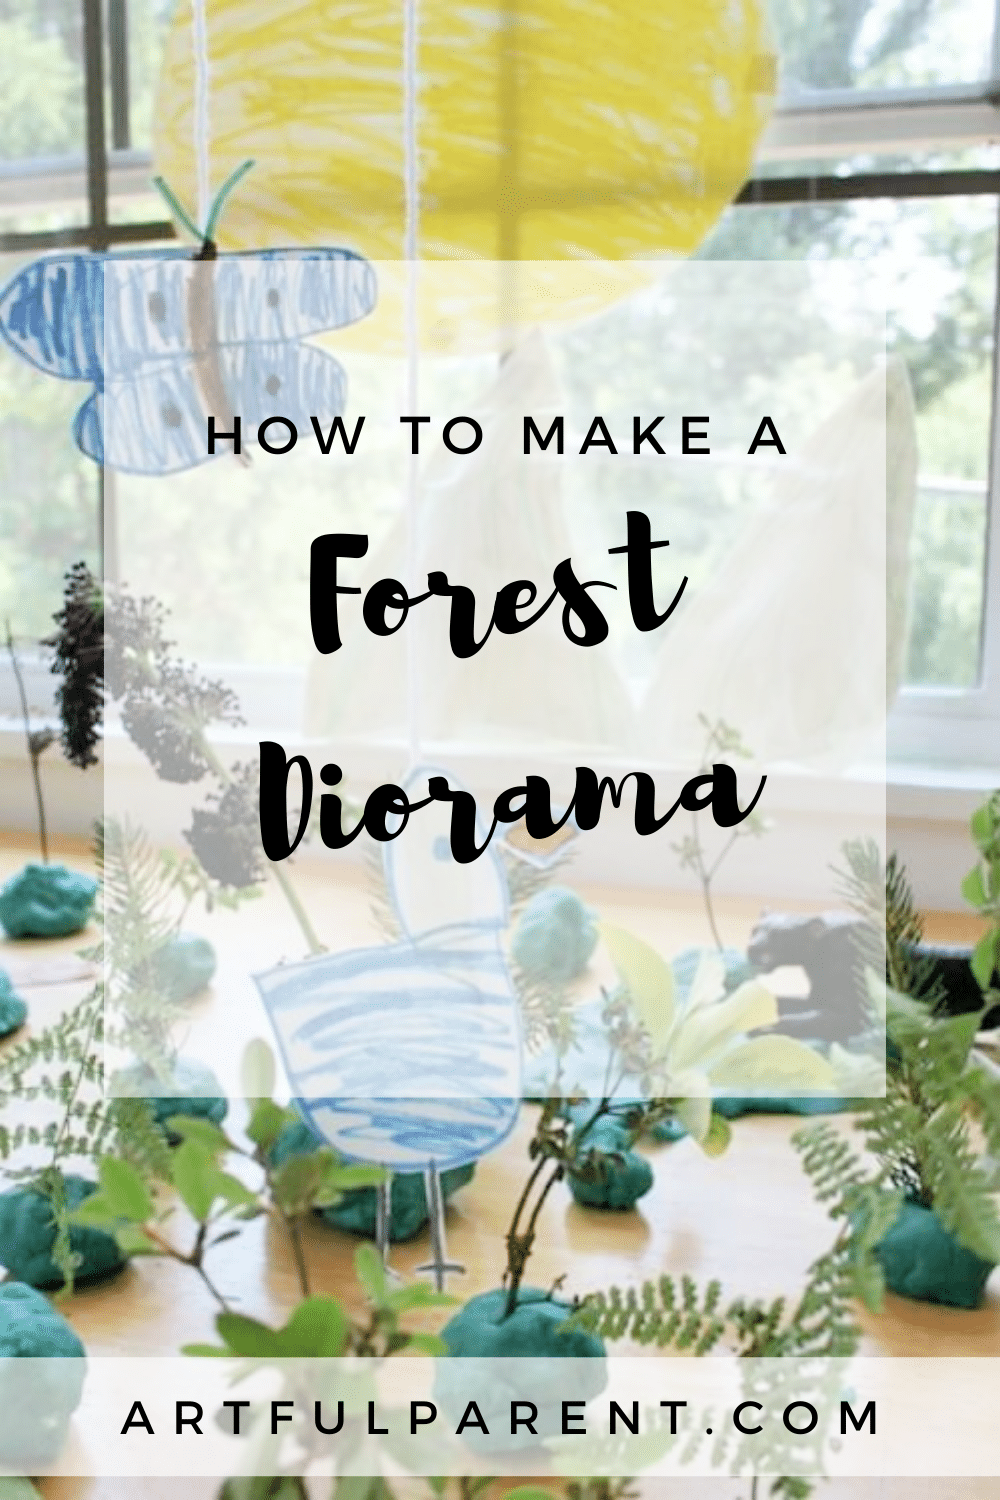 How to Make a Forest Diorama